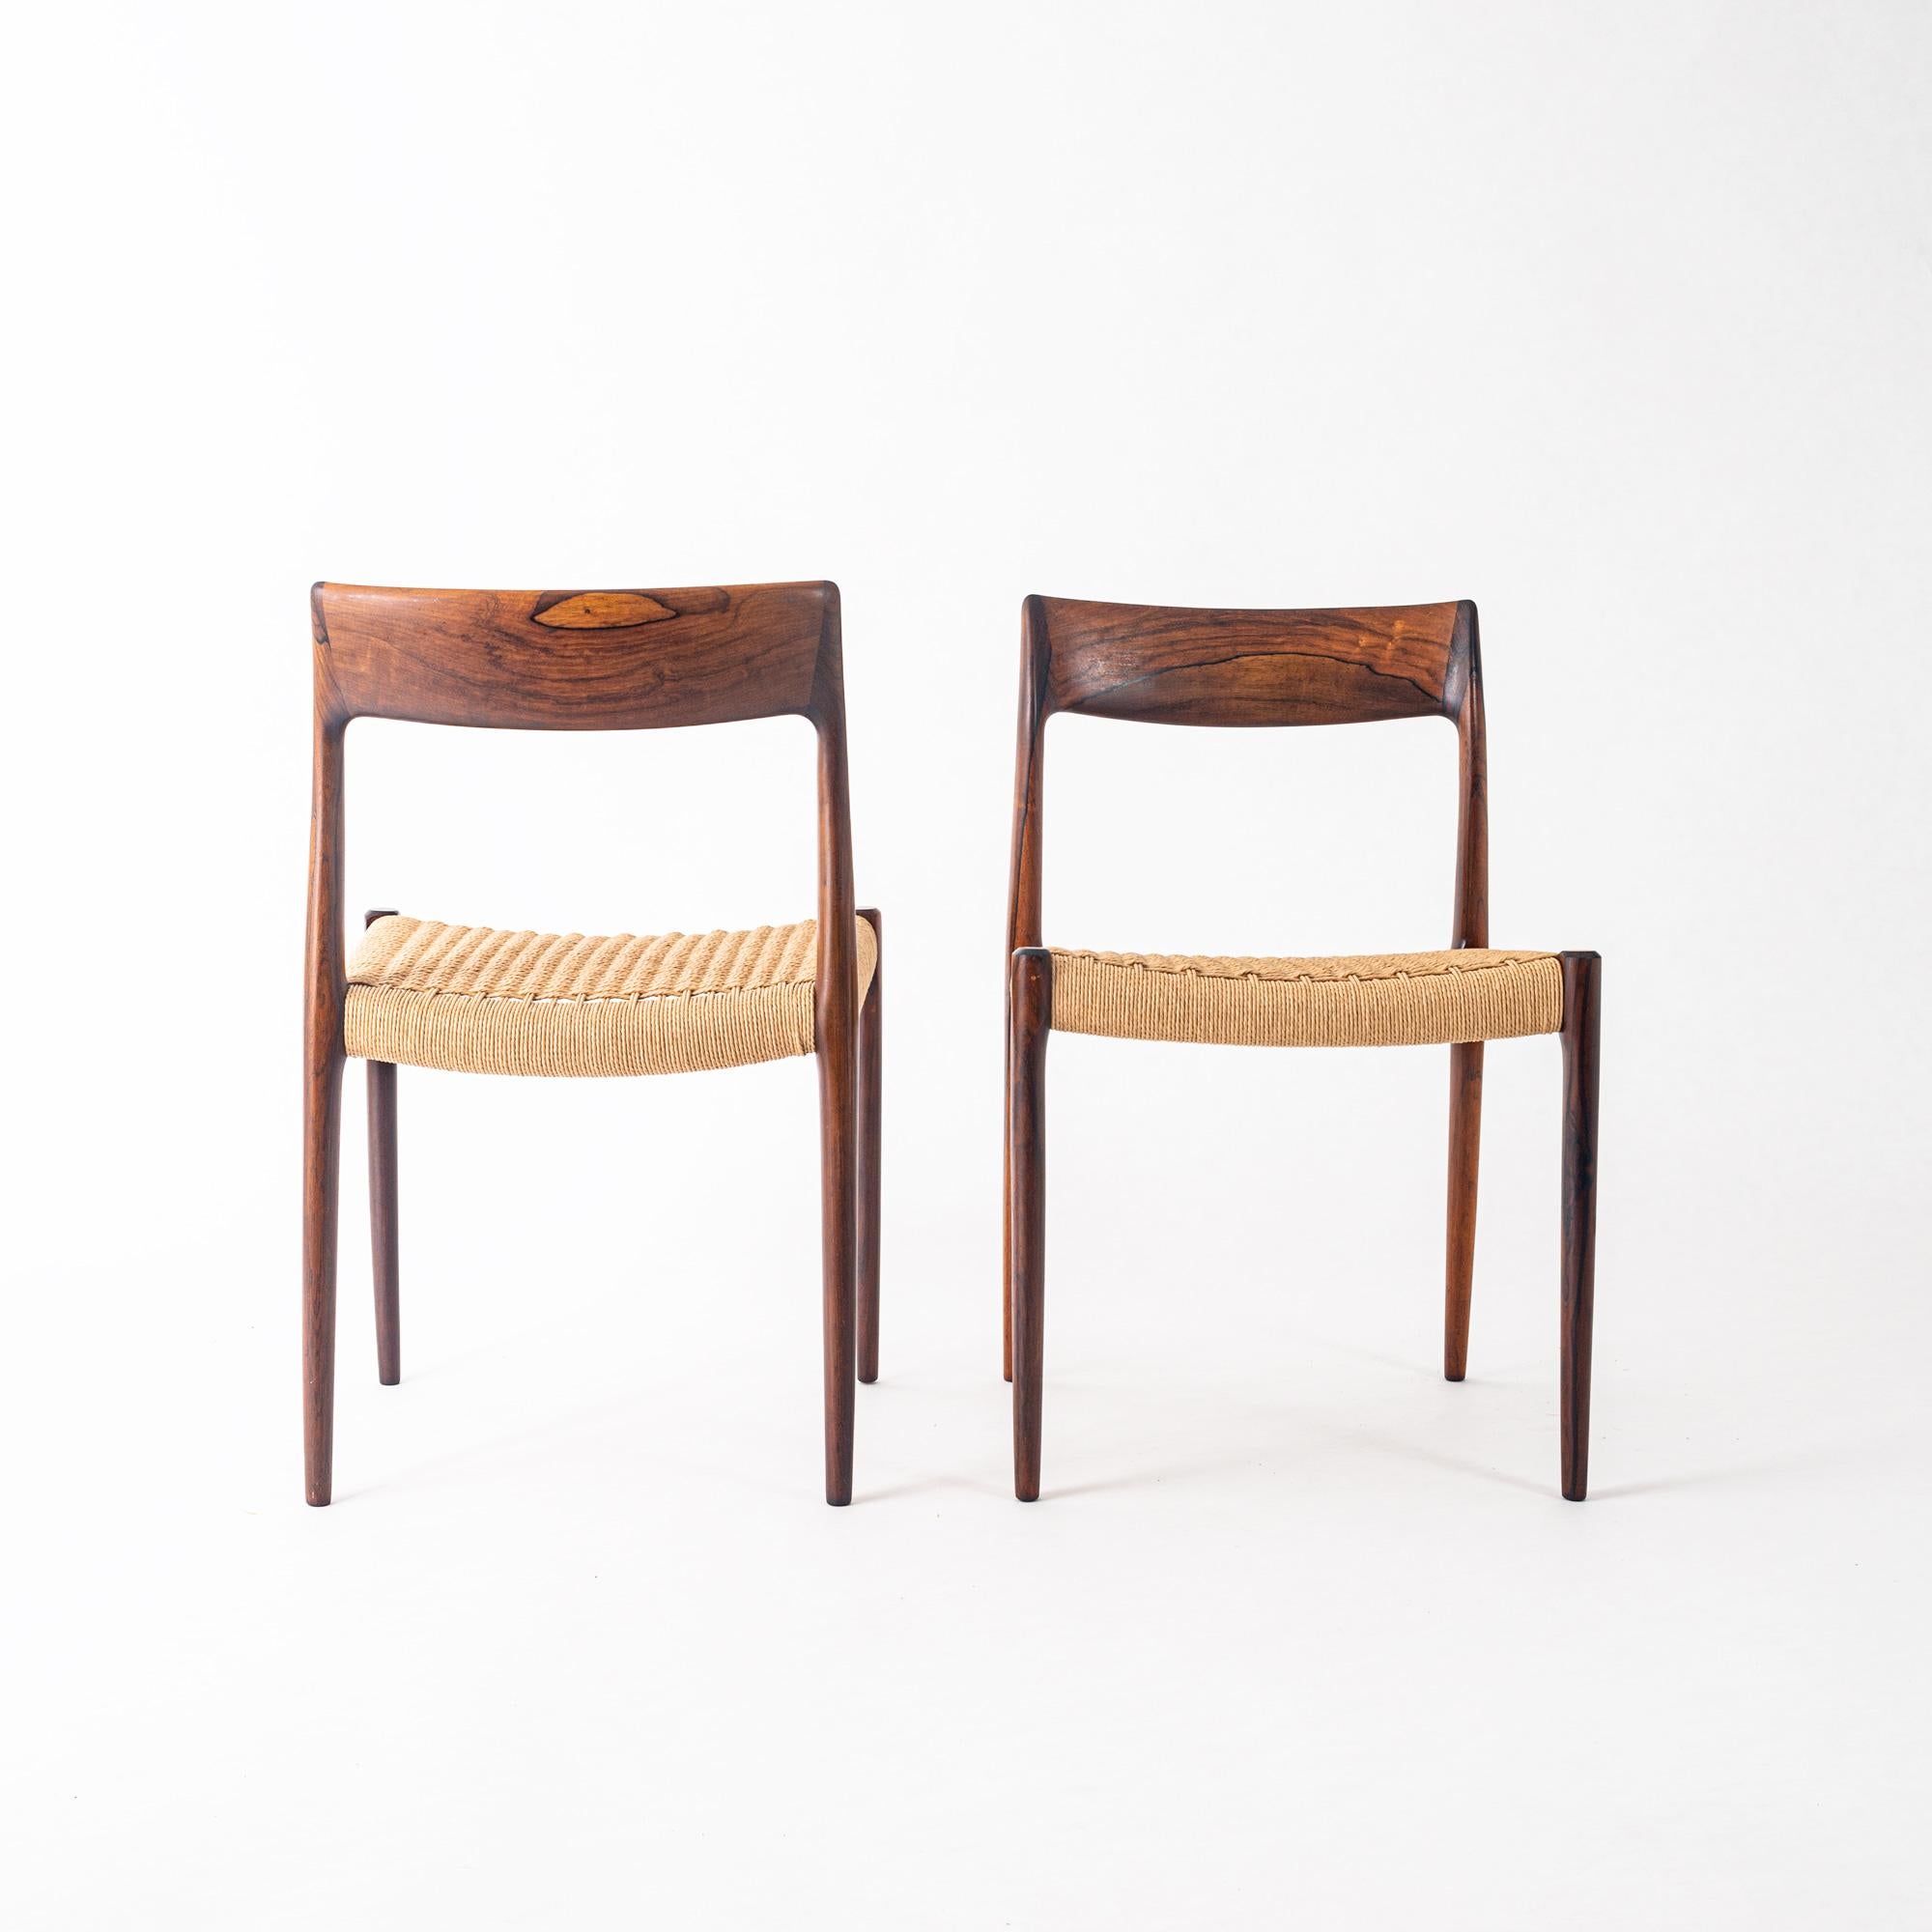 Set of 8 Brazilian rosewood dining chairs designed by Niels O. Moller for J.L. Moller Mobelfabrik, Denmark, 1959. Newly refinished and papercorded seats, the makers mark is on the bottom of each chair. Each chair has unique wood grains, a beautiful